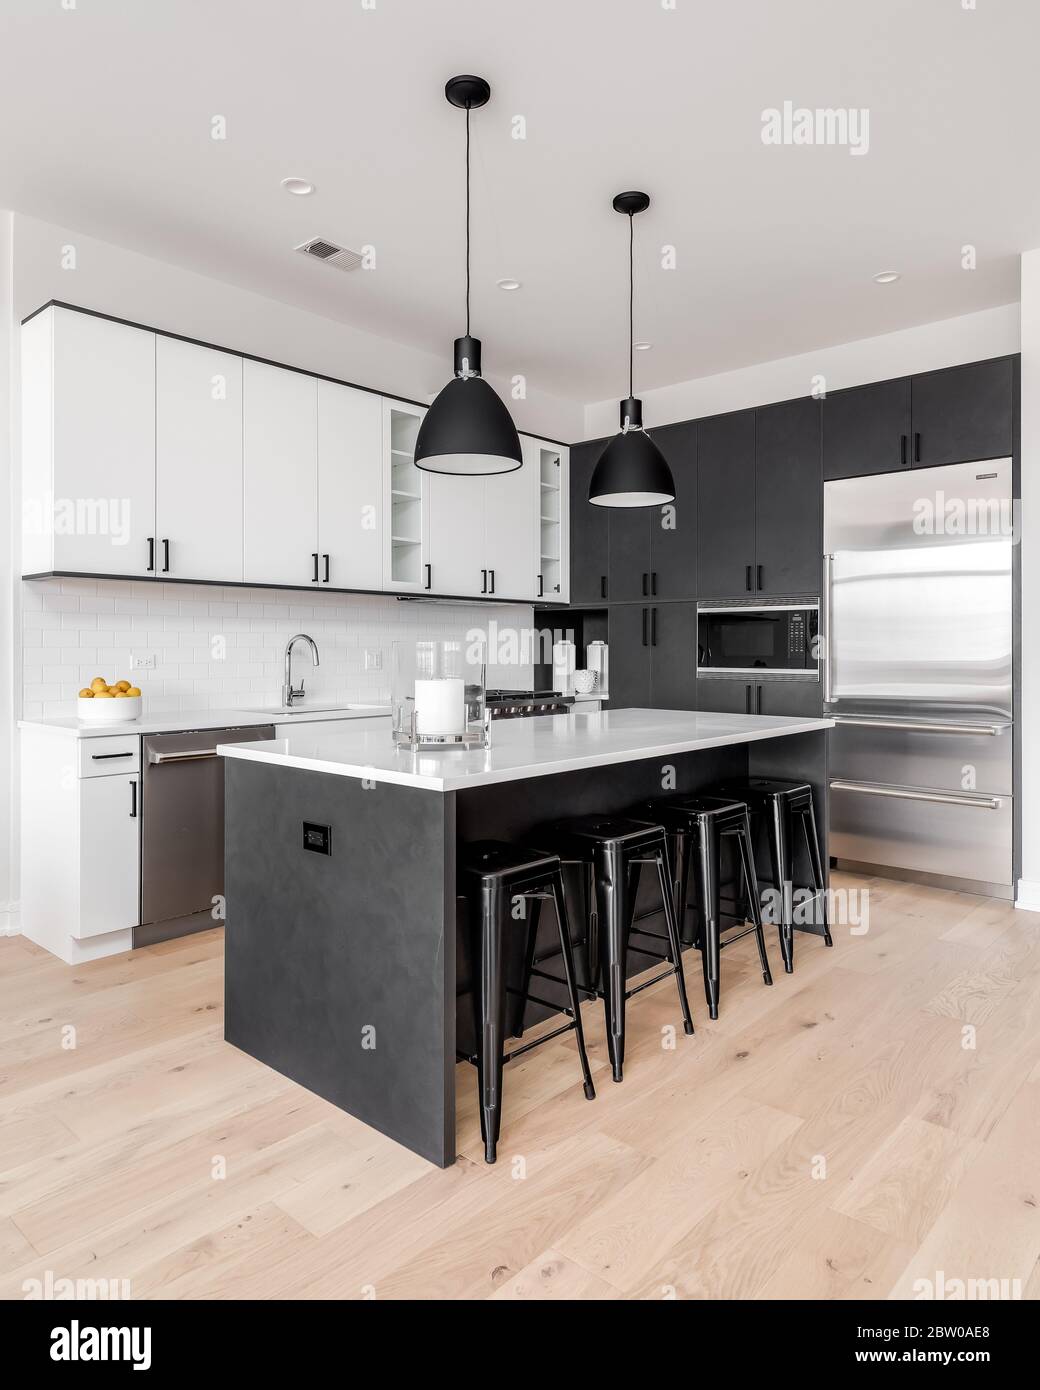 A modern kitchen with black and white cabinets, stainless steel Wolf and Sub-Zero appliances, and bar stools sitting at the white granite counter top. Stock Photo